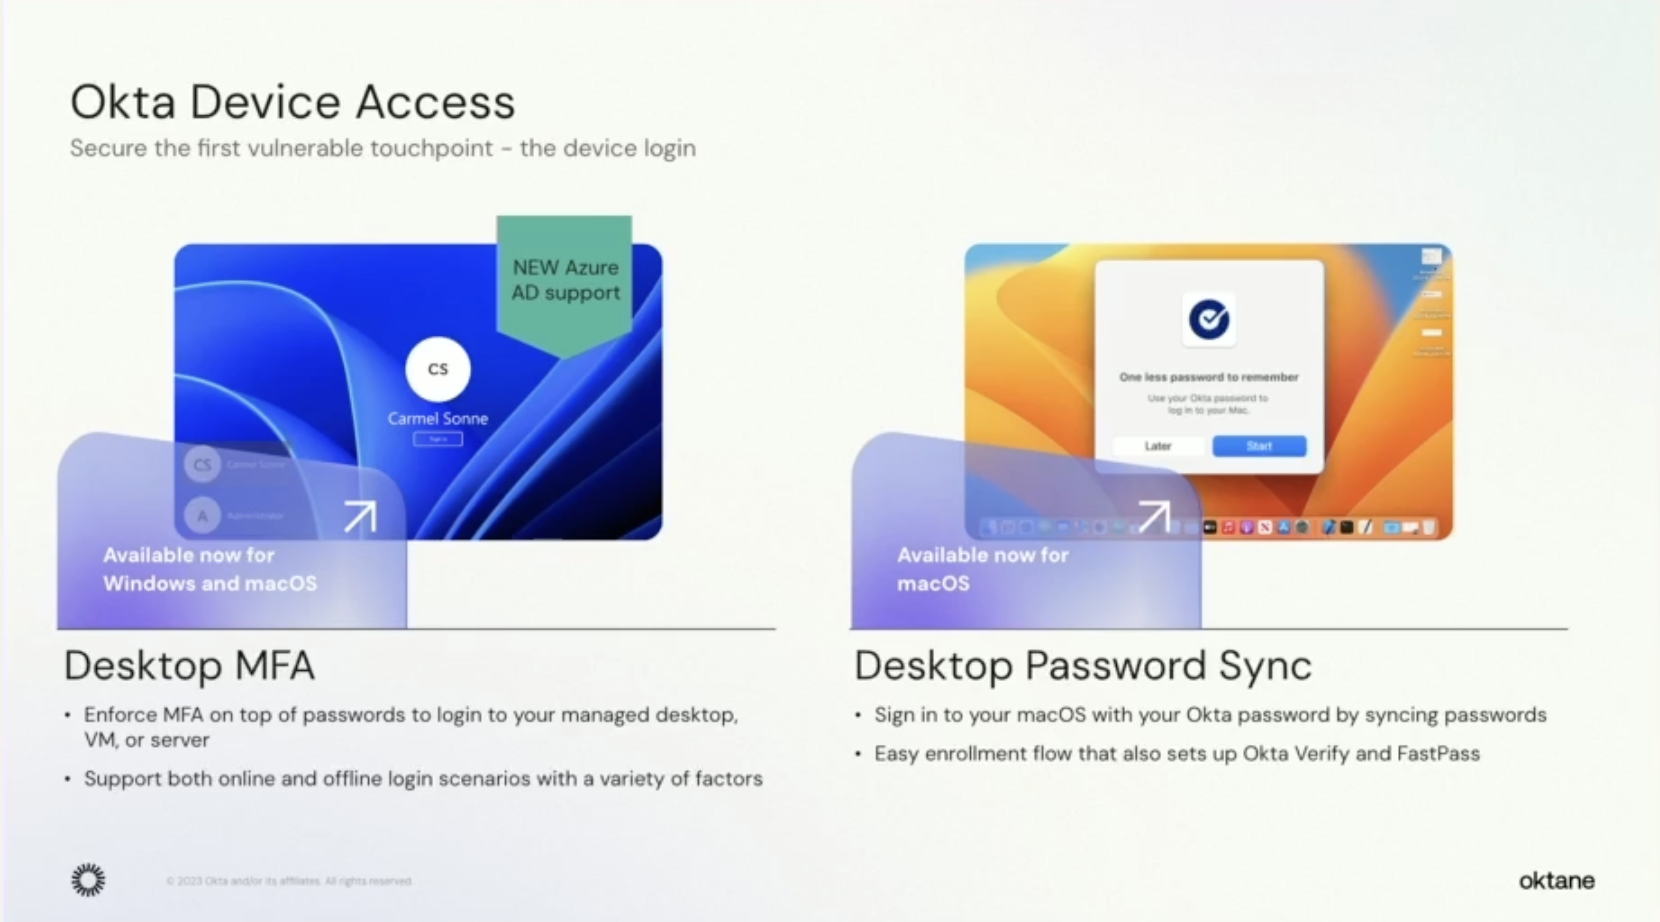 An image exhibiting the features of both Desktop MFA and Desktop Password Sync that are part of Okta's Device Access solution.